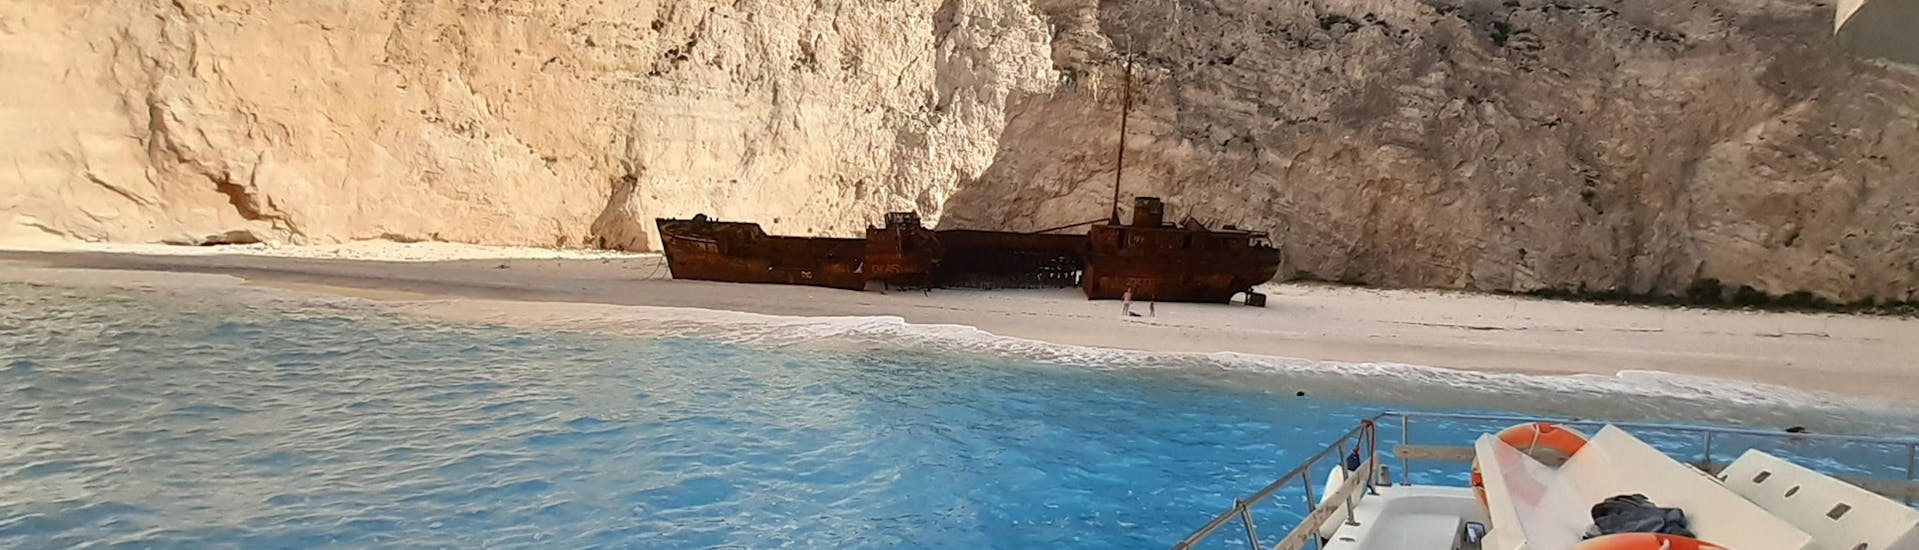 The shipwreck laying on the beach during a visit during a Private Boat Trip around Zakynthos from Agios Nikolaos with Theodosis Cruises Zakynthos.